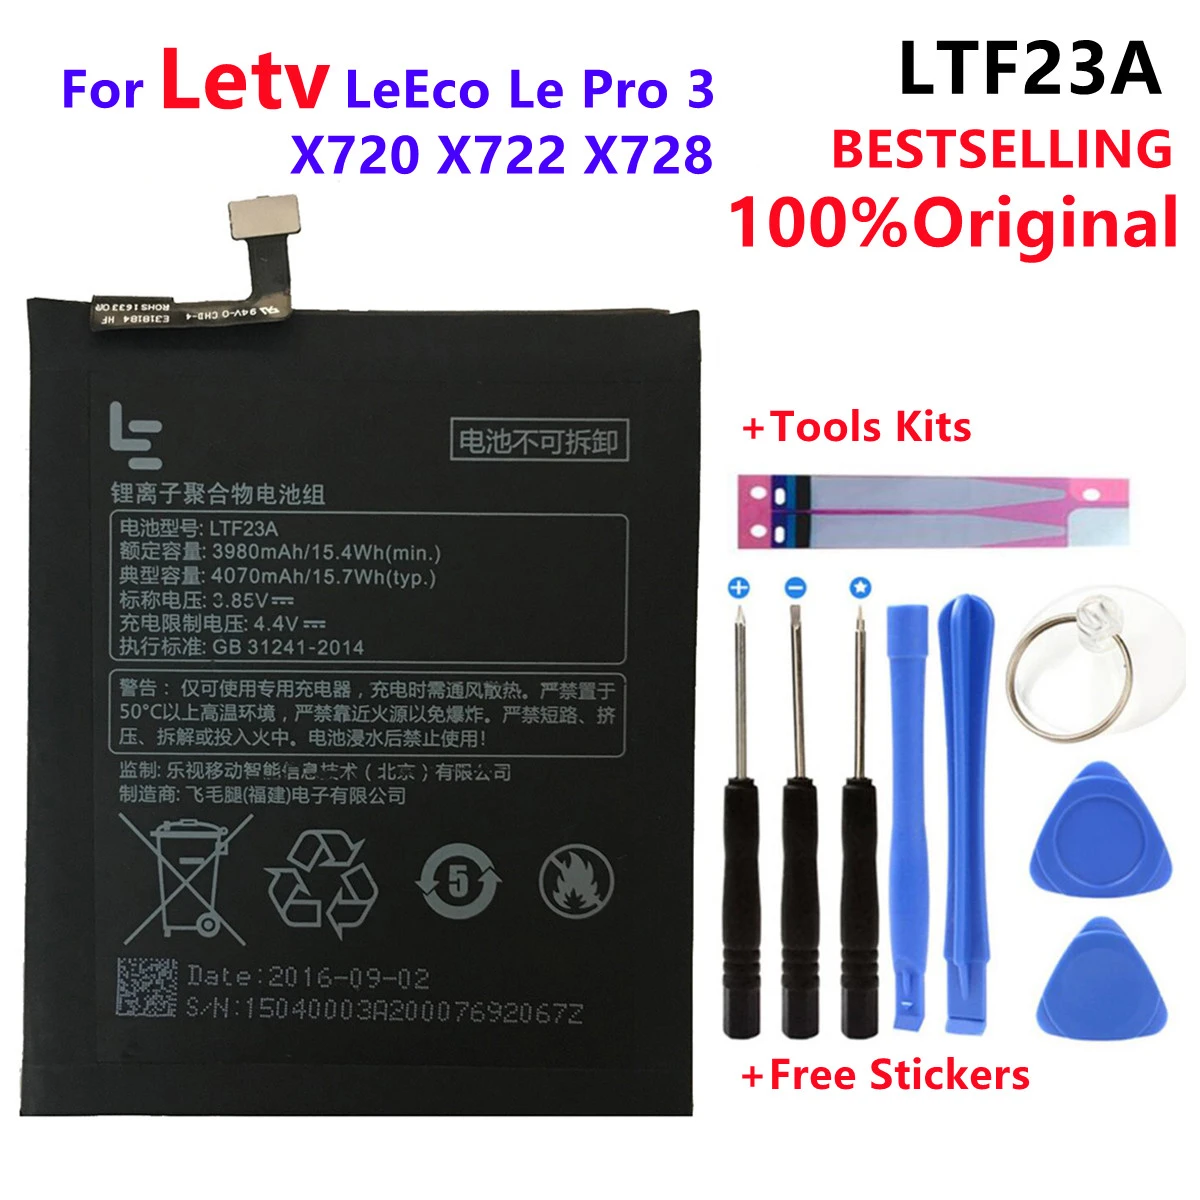 100% original Good quality Real LTF23A 4070mAh Battery For Letv LeEco Le Pro 3 X720 X722 X728 Battery Replacement best mobile charger